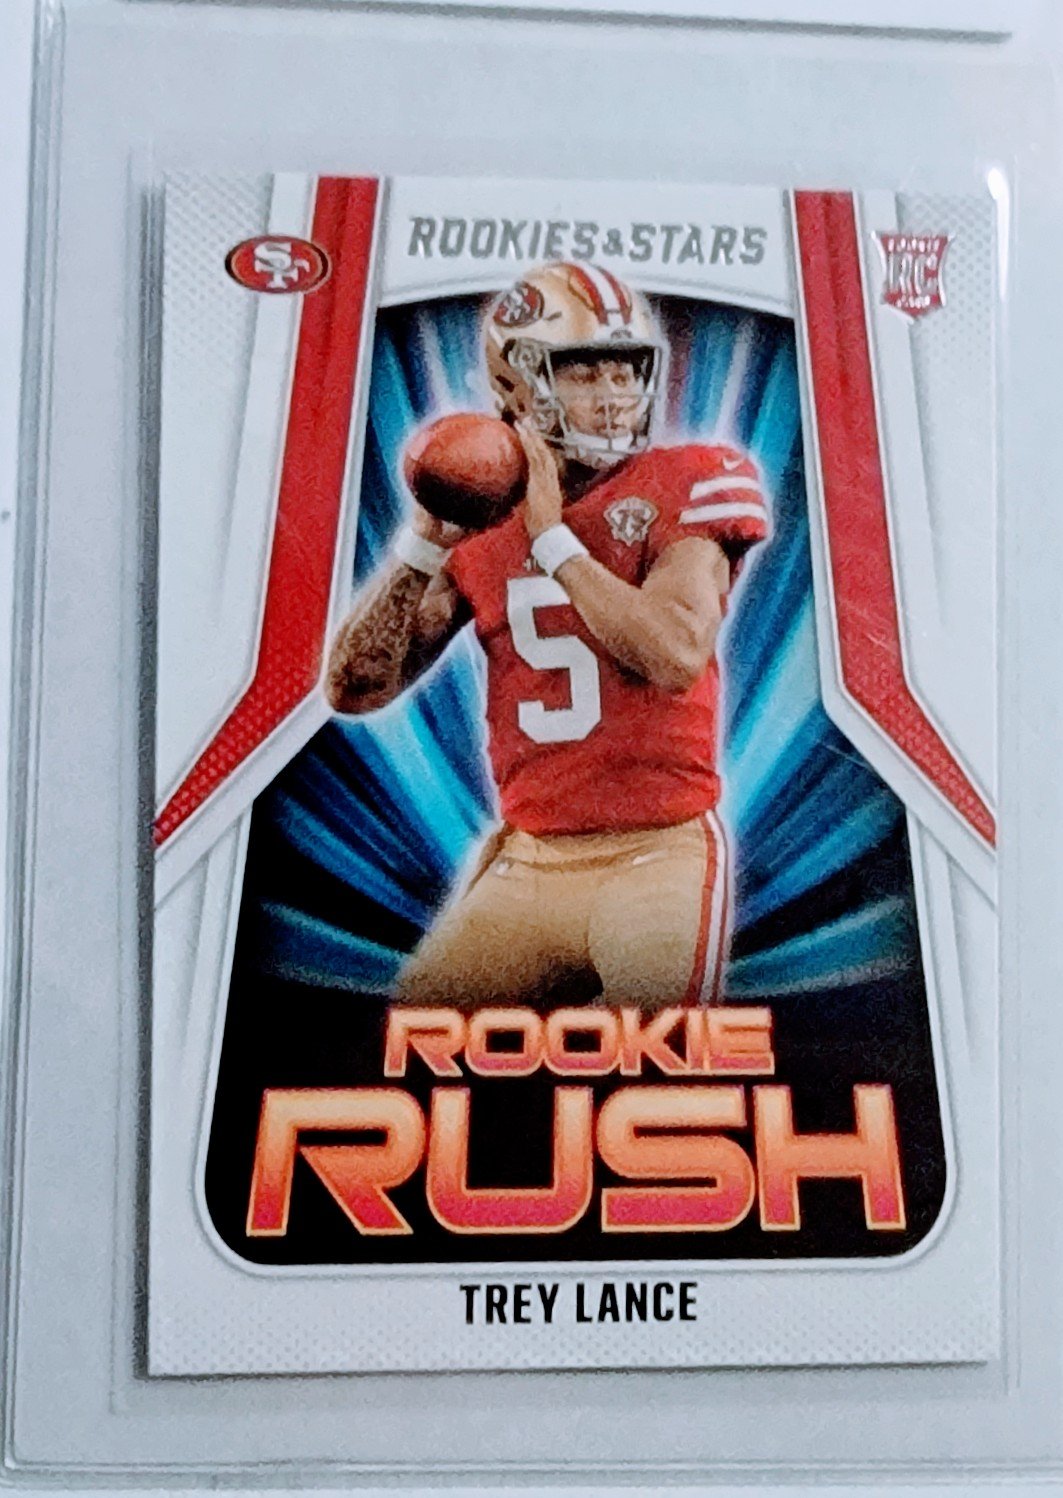 2021 Panini Rookies and Stars Trey Lance Rookie Rush Insert Rookie Football Card AVM1 simple Xclusive Collectibles   